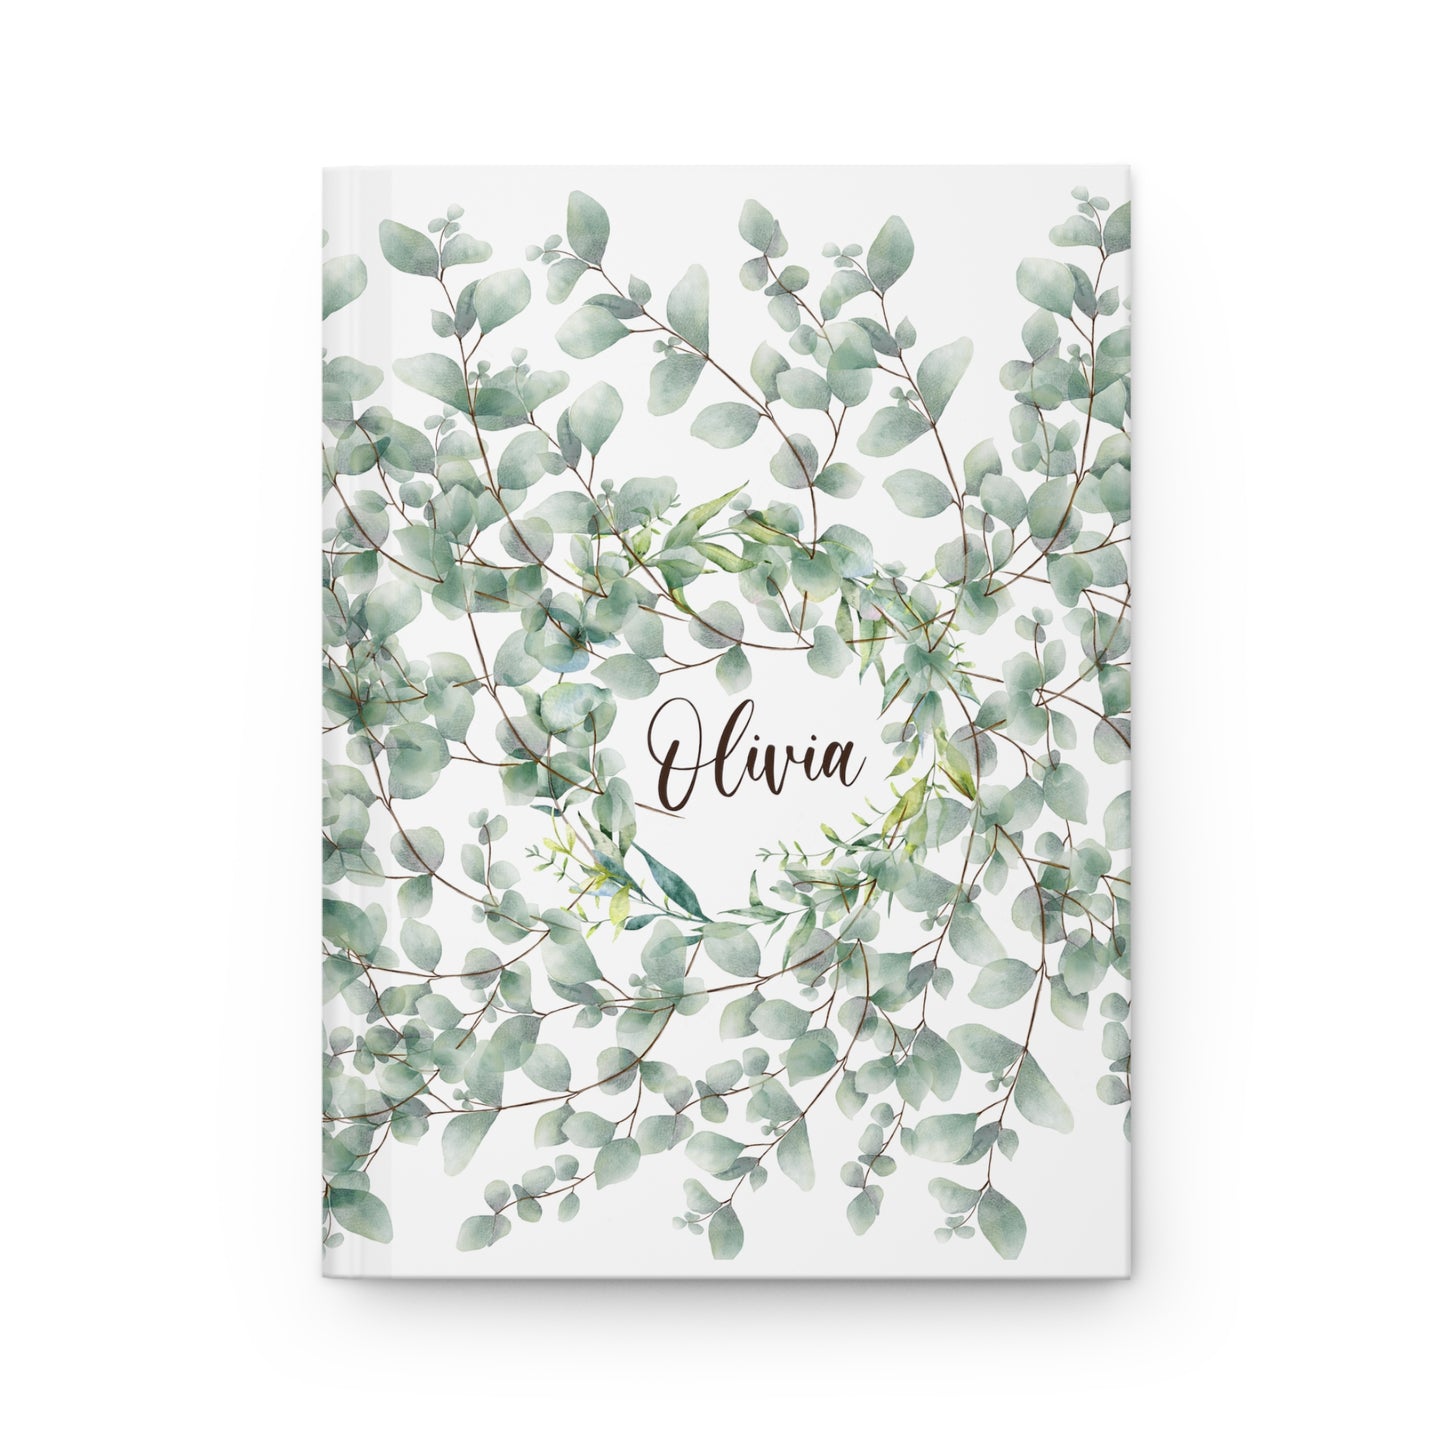 personalized hard cover journal with eucalyptus print. perfect for bridesmaid or wedding gift.